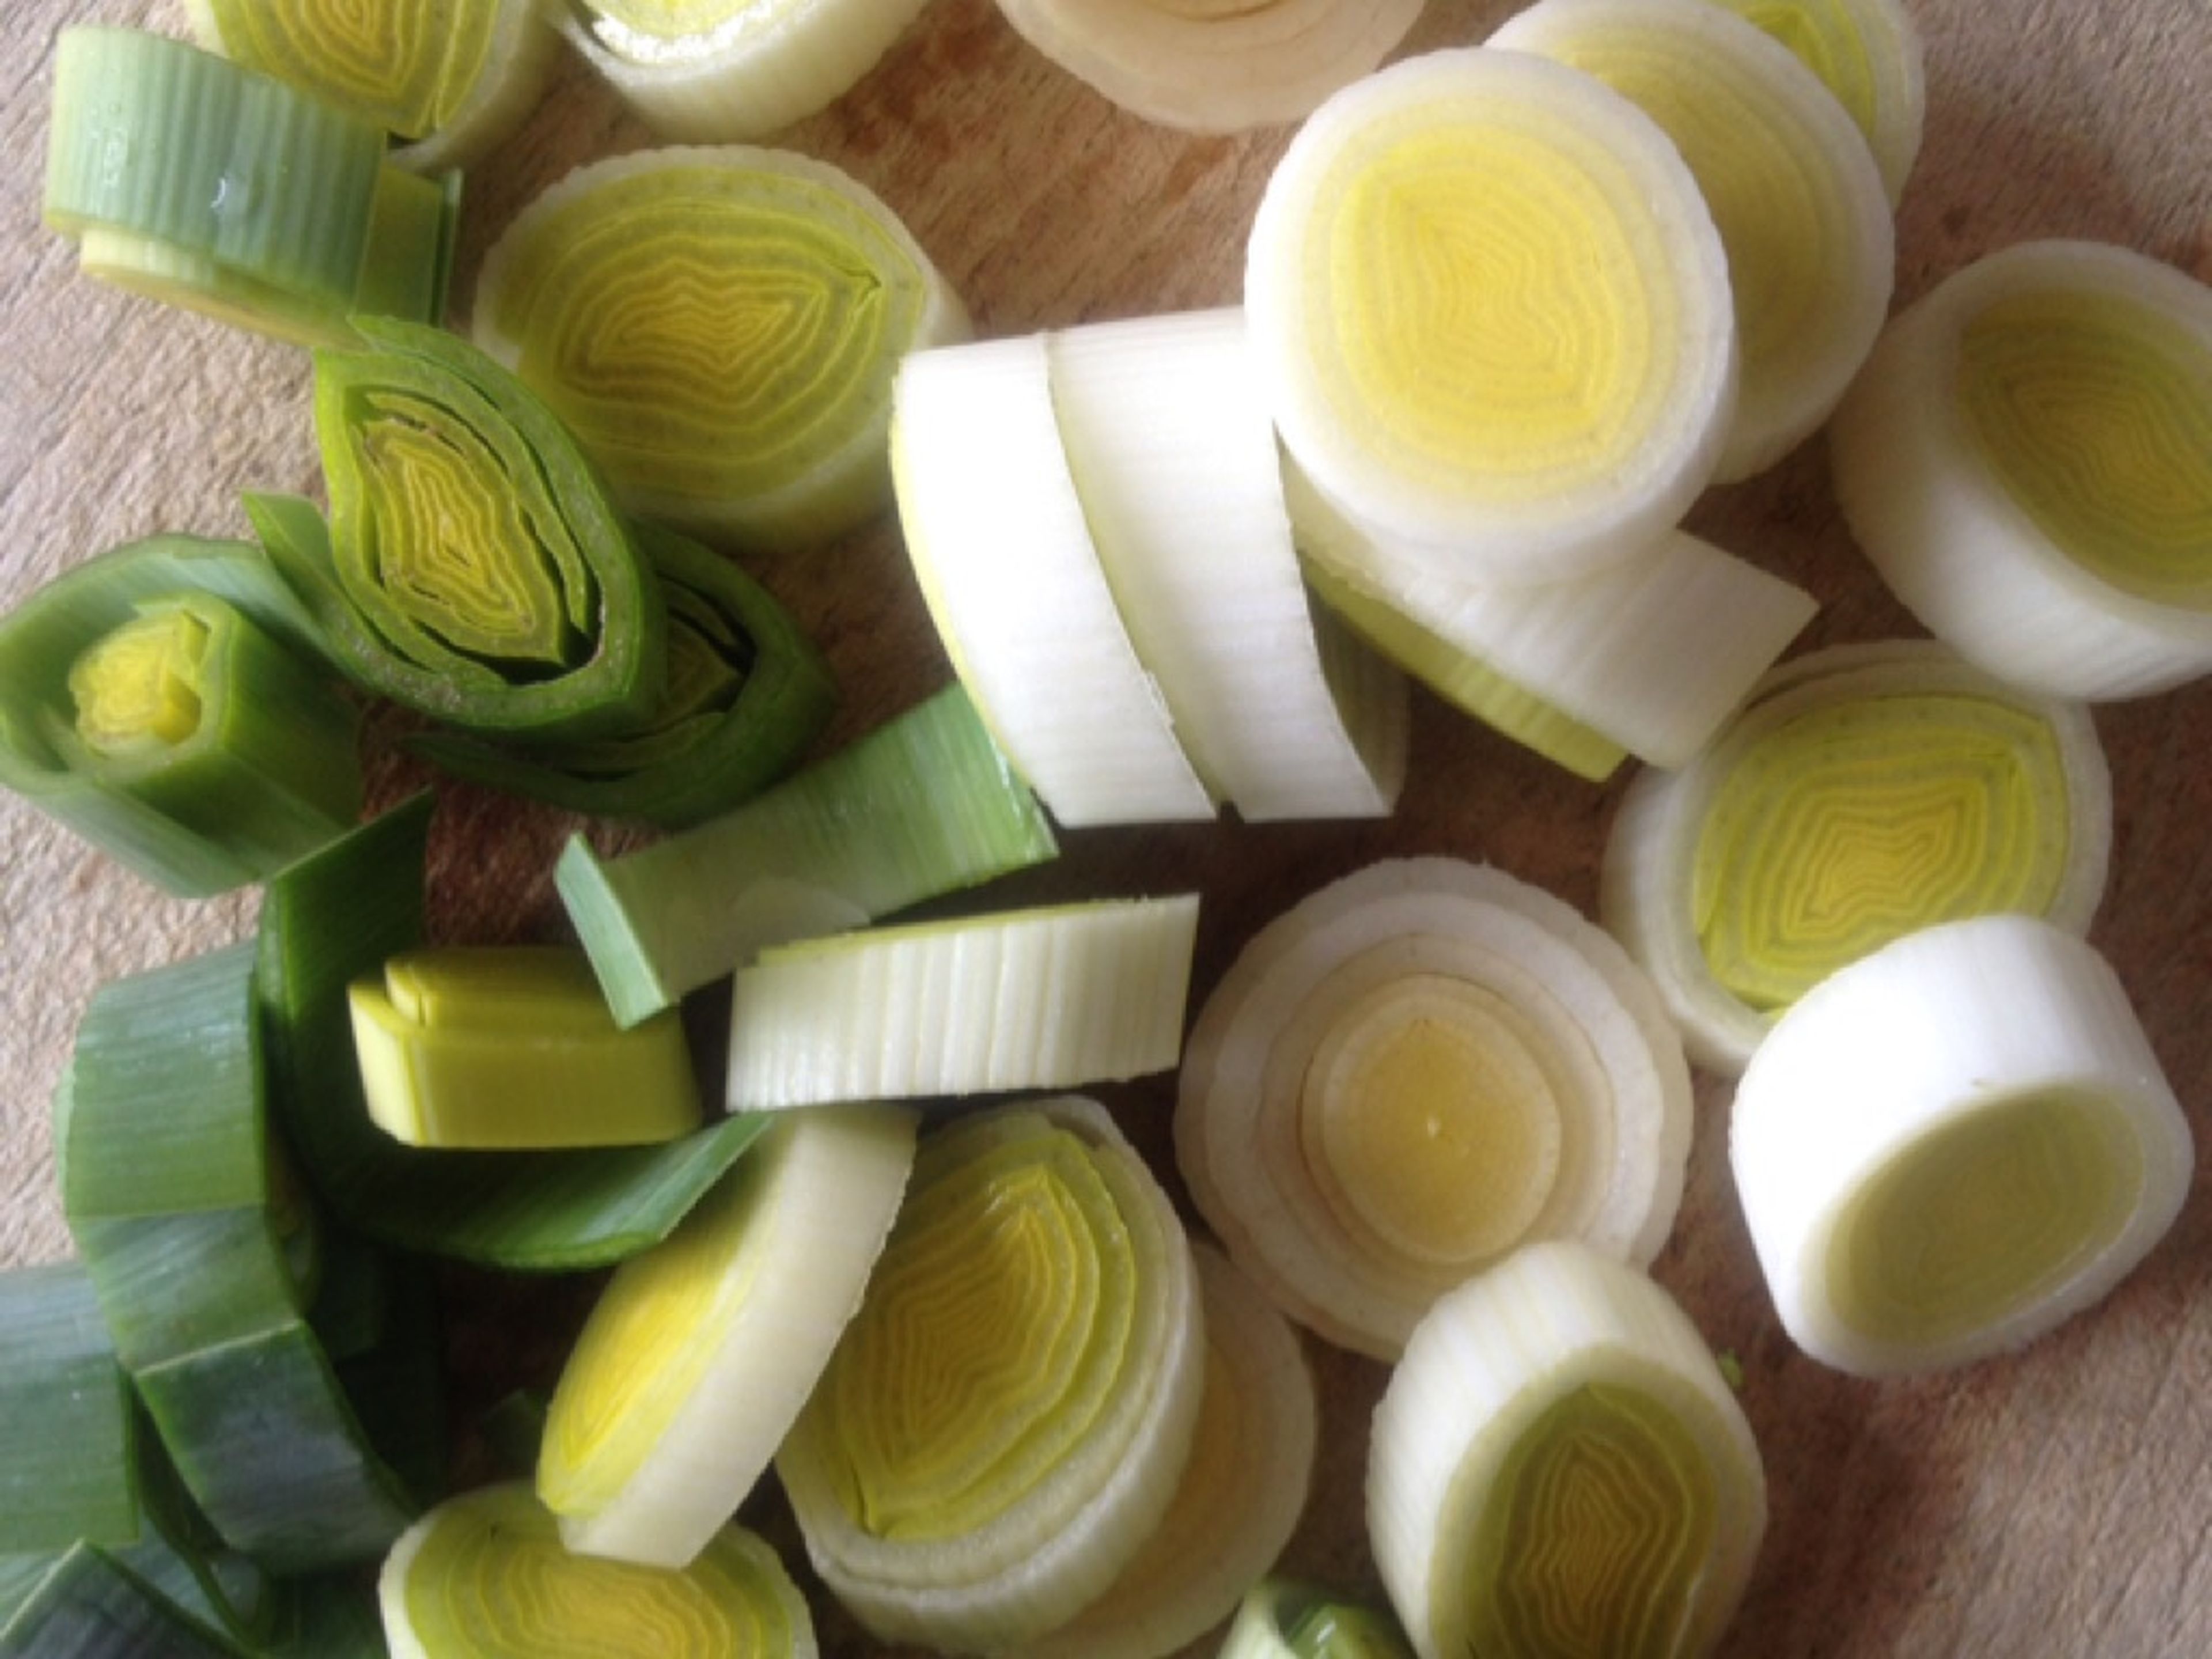 Remove deep green part of the leek, wash, and cut into 0.5-cm/0.2-inch thick slices.